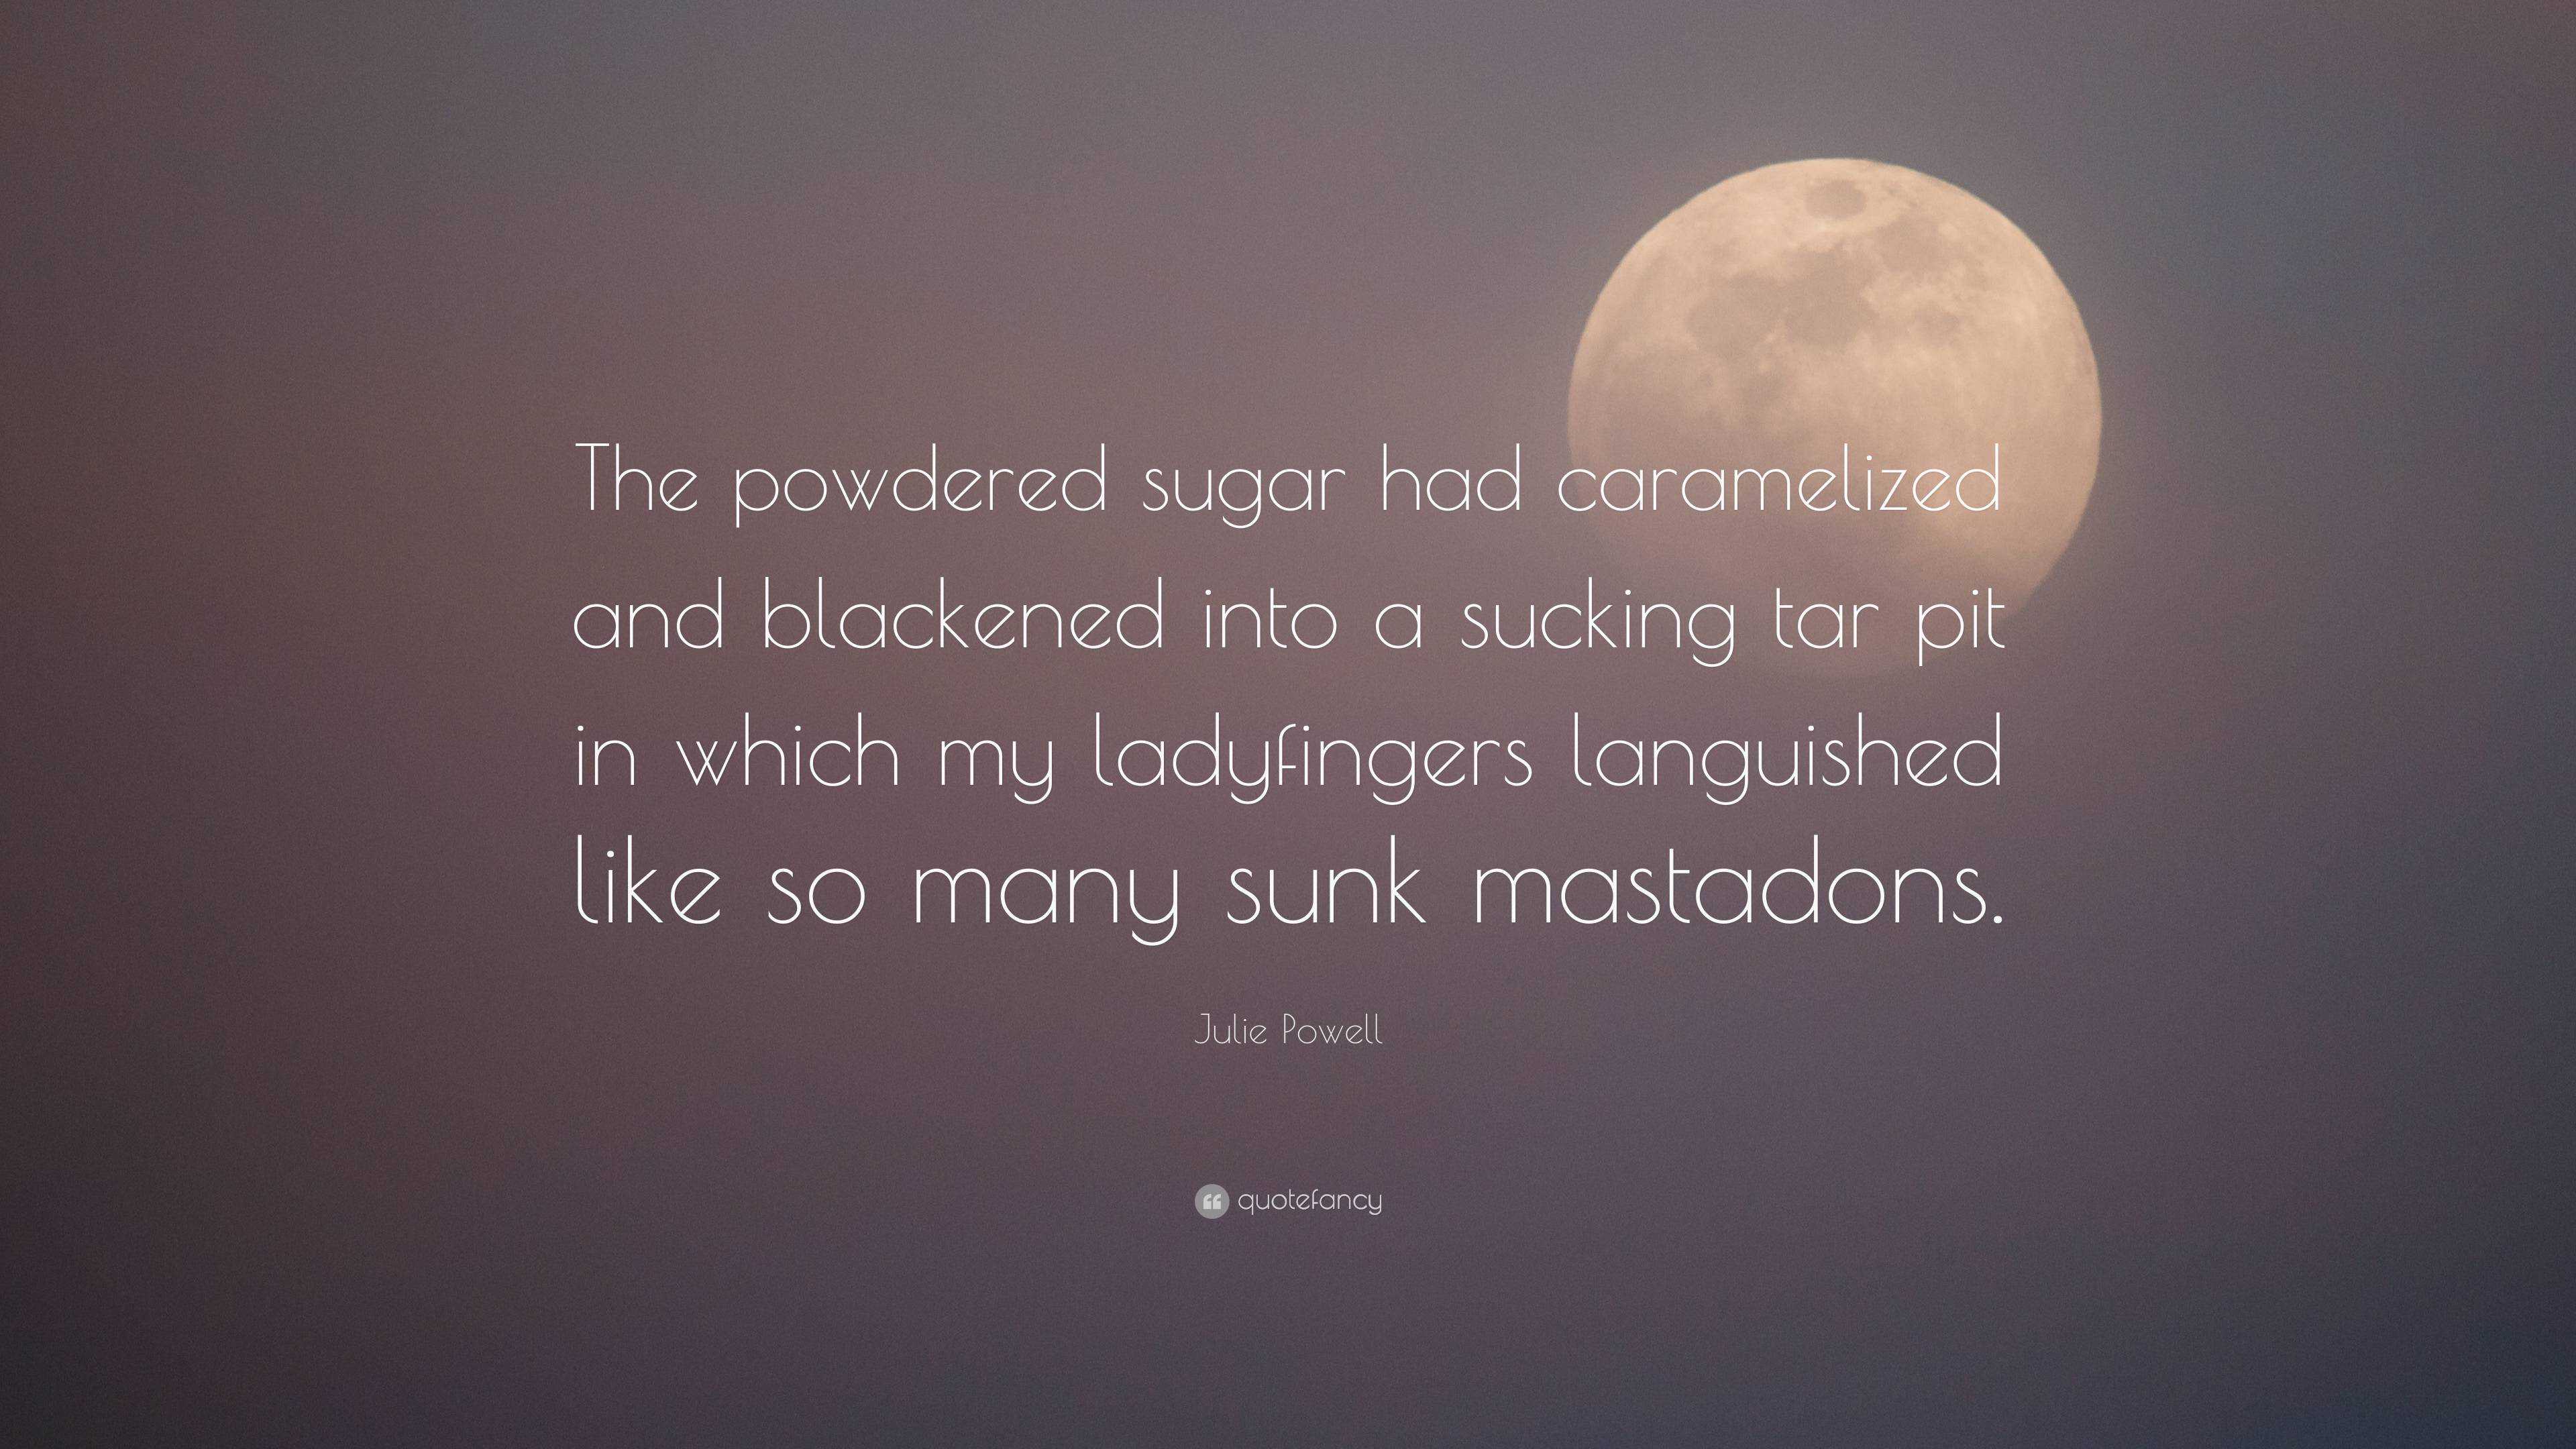 Julie Powell Quote: “The powdered sugar had caramelized and blackened ...